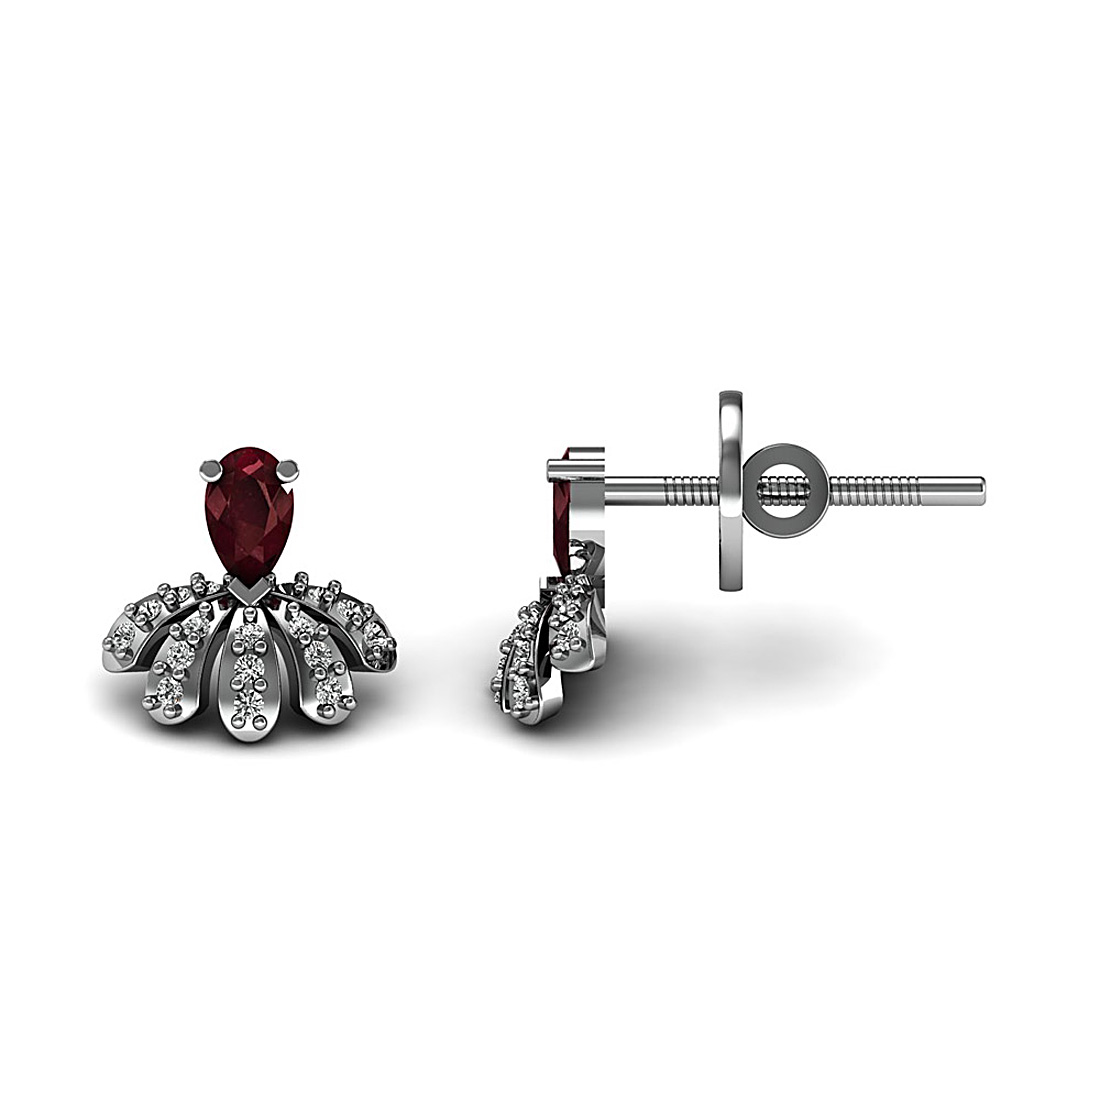 Real ruby gemstone stud earrings made in 18k solid white gold adorned with natural diamond.